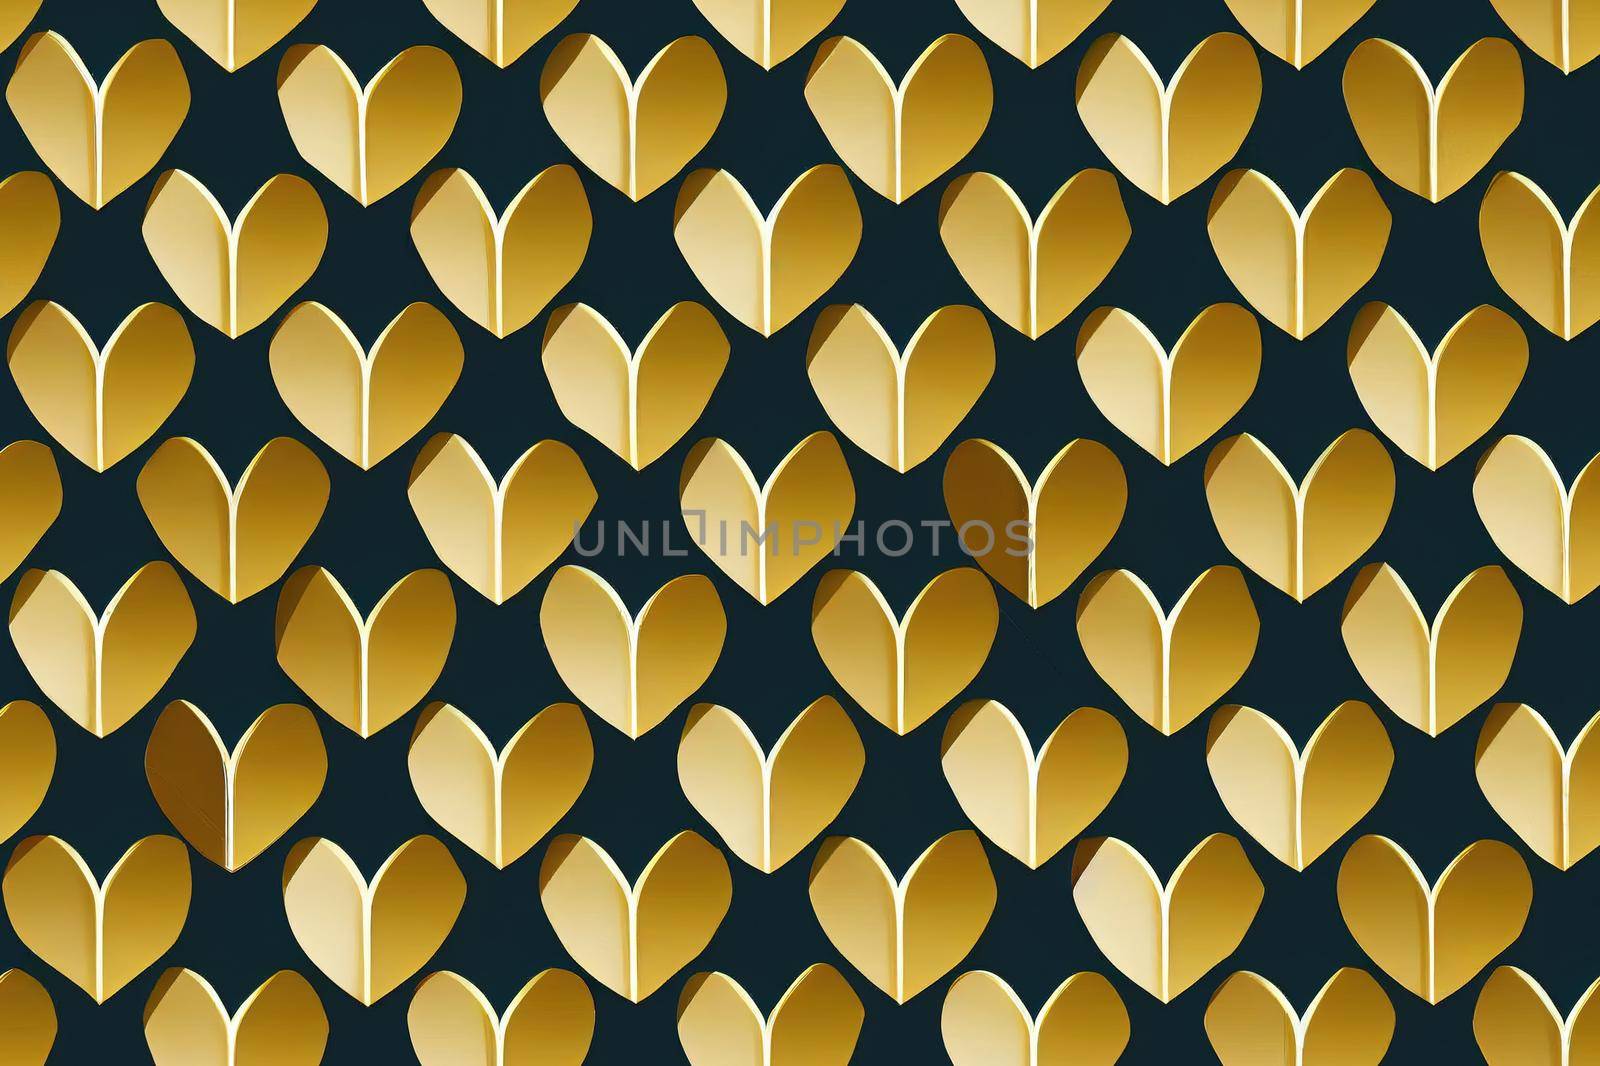 Continuous line hearts. Gold heart seamless pattern. Elegant outlined golden heart. Contemporary outline heart background for wedding design wrapping paper, gift wrappers, wallpapers, prints.